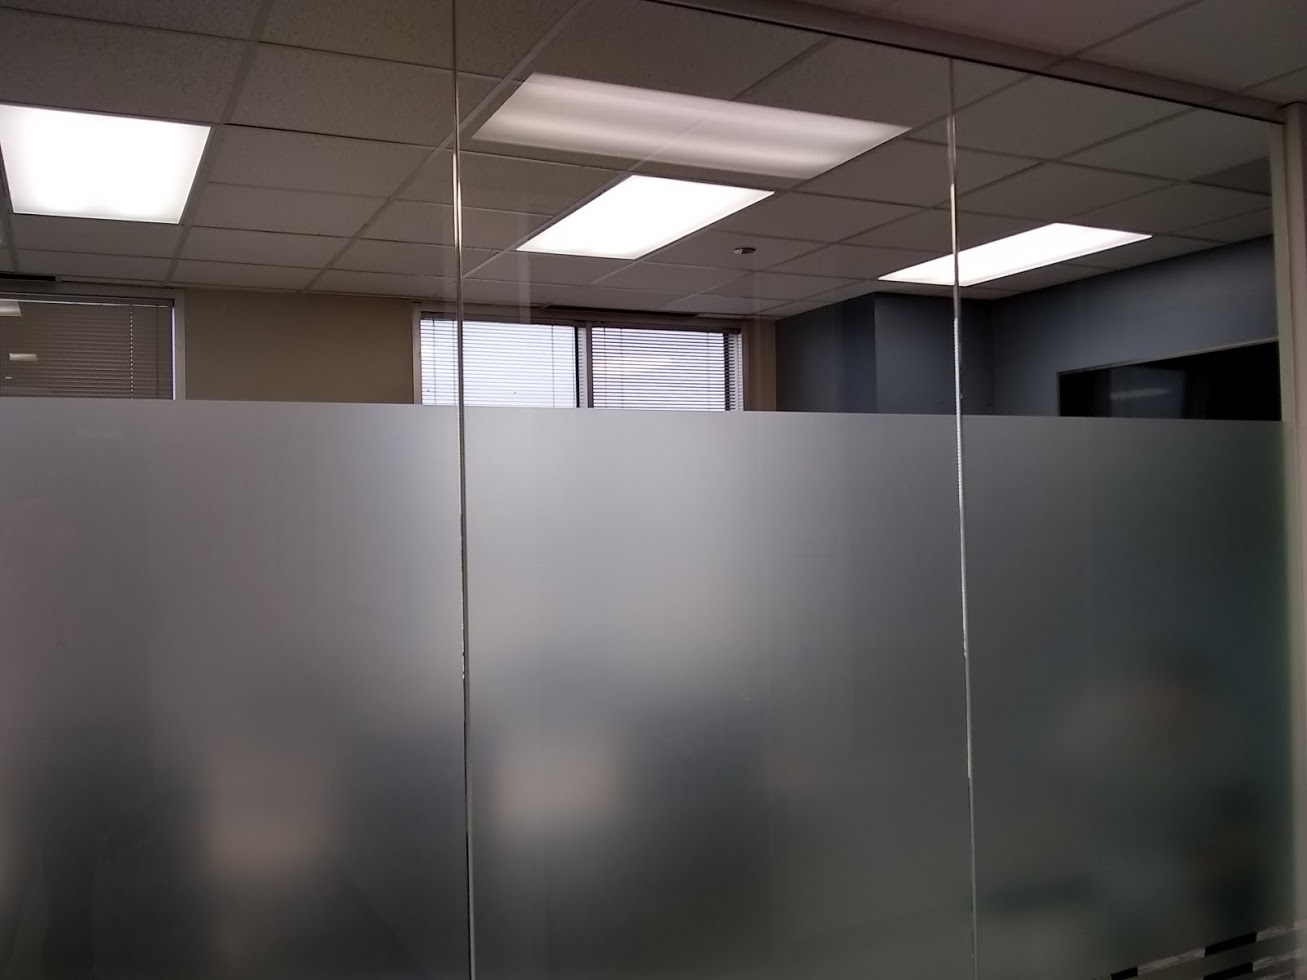 3M Dusted Crystal, Executive Offices, Privacy Frost, Decorative Film, Arlington, TX